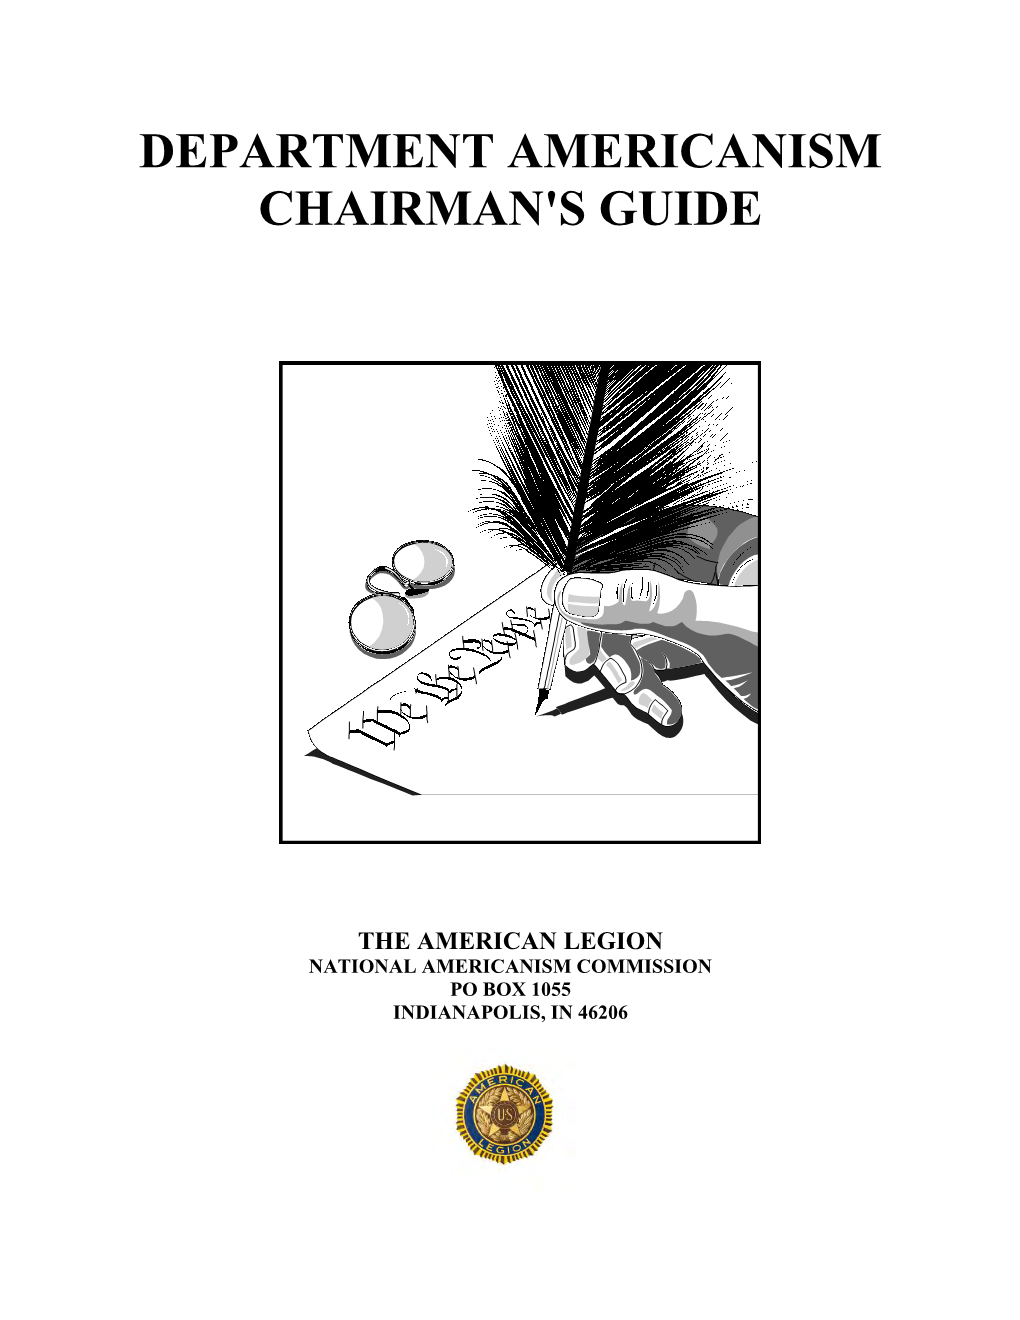 Department Americanism Chairman's Guide